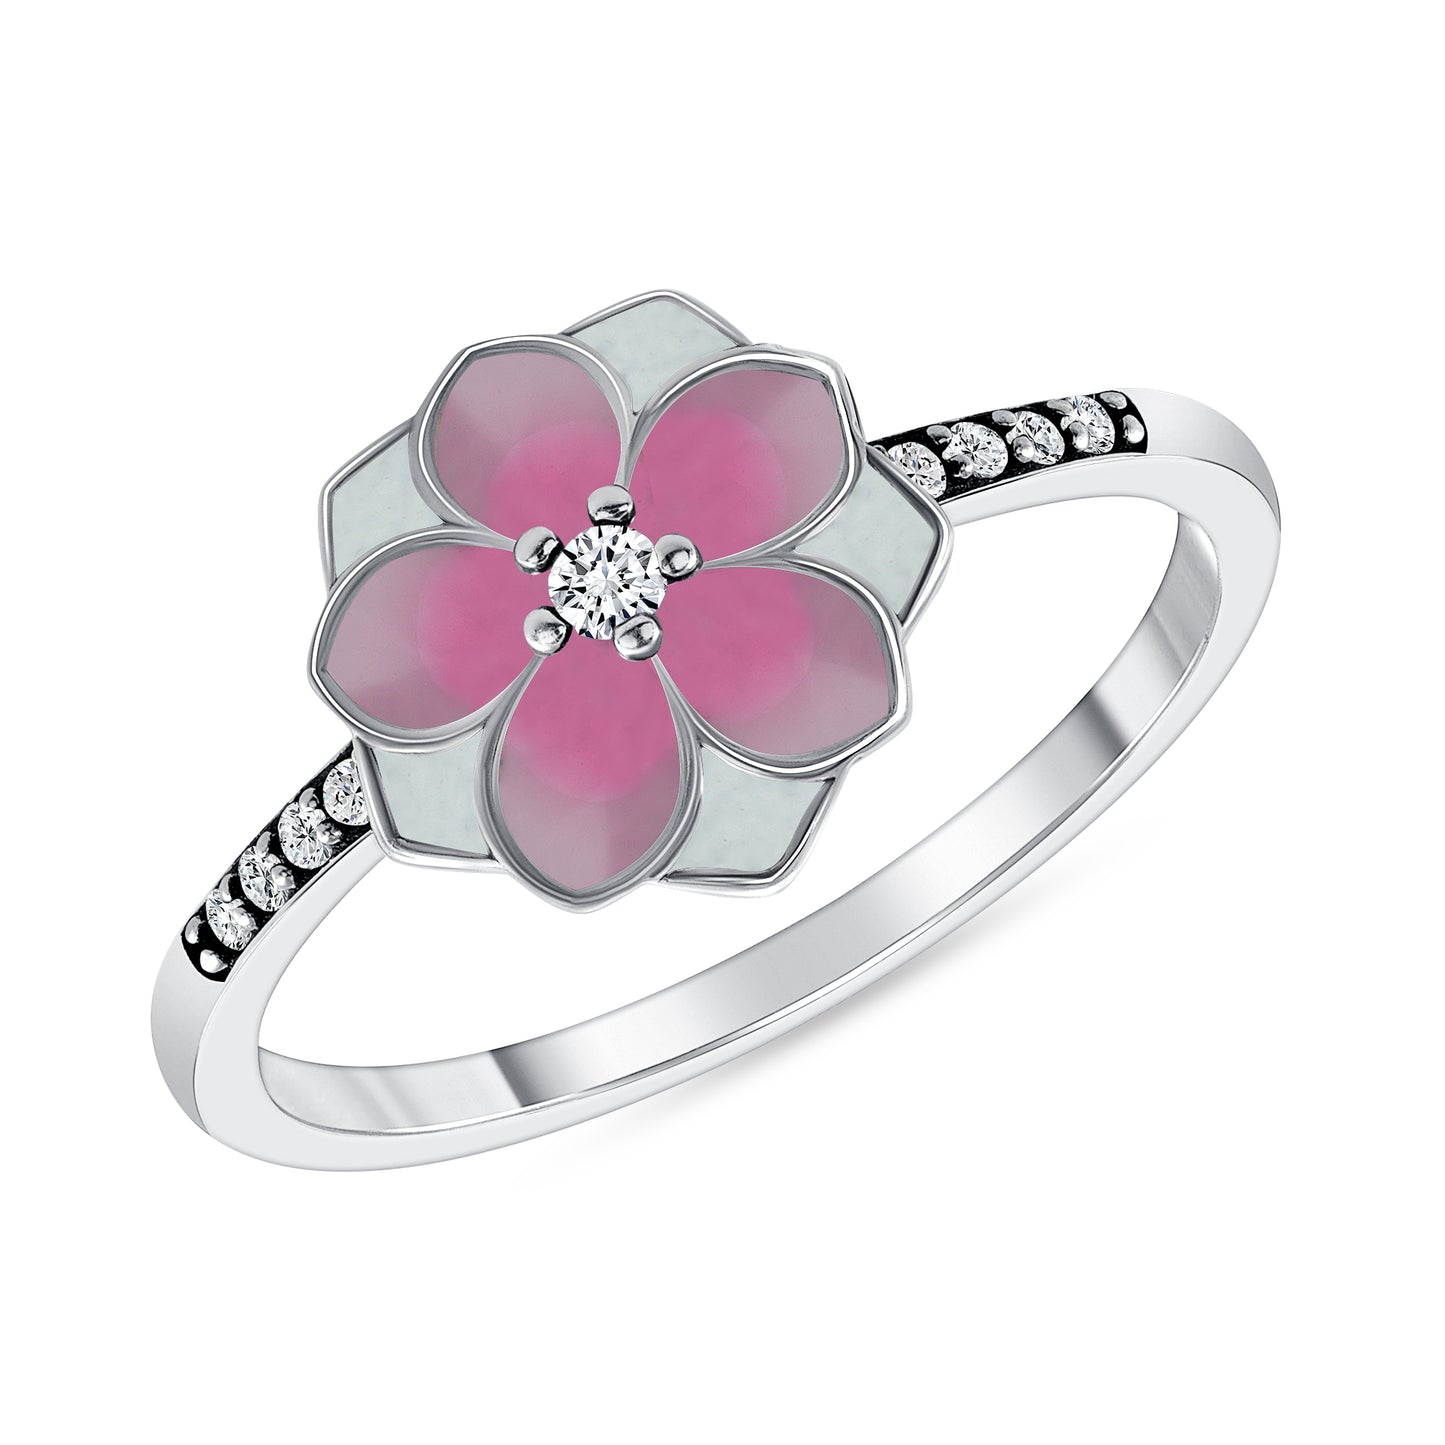 Silver 925 Rhodium Plated White and Pink Flower Enamel Ring. R10211